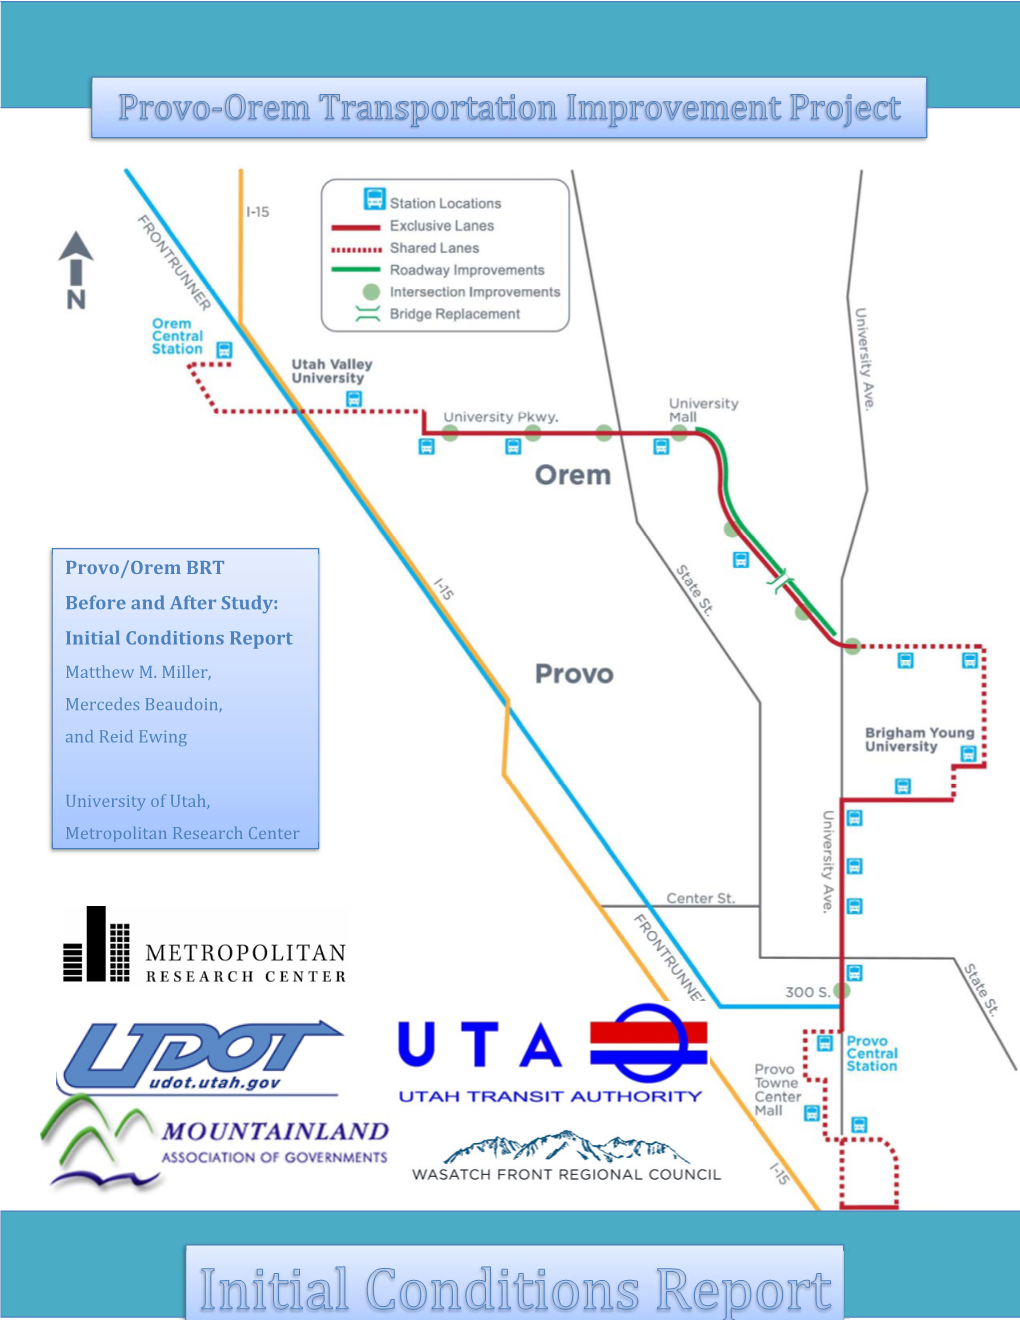 Provo/Orem BRT Before and After Study: Initial Conditions Report Matthew M